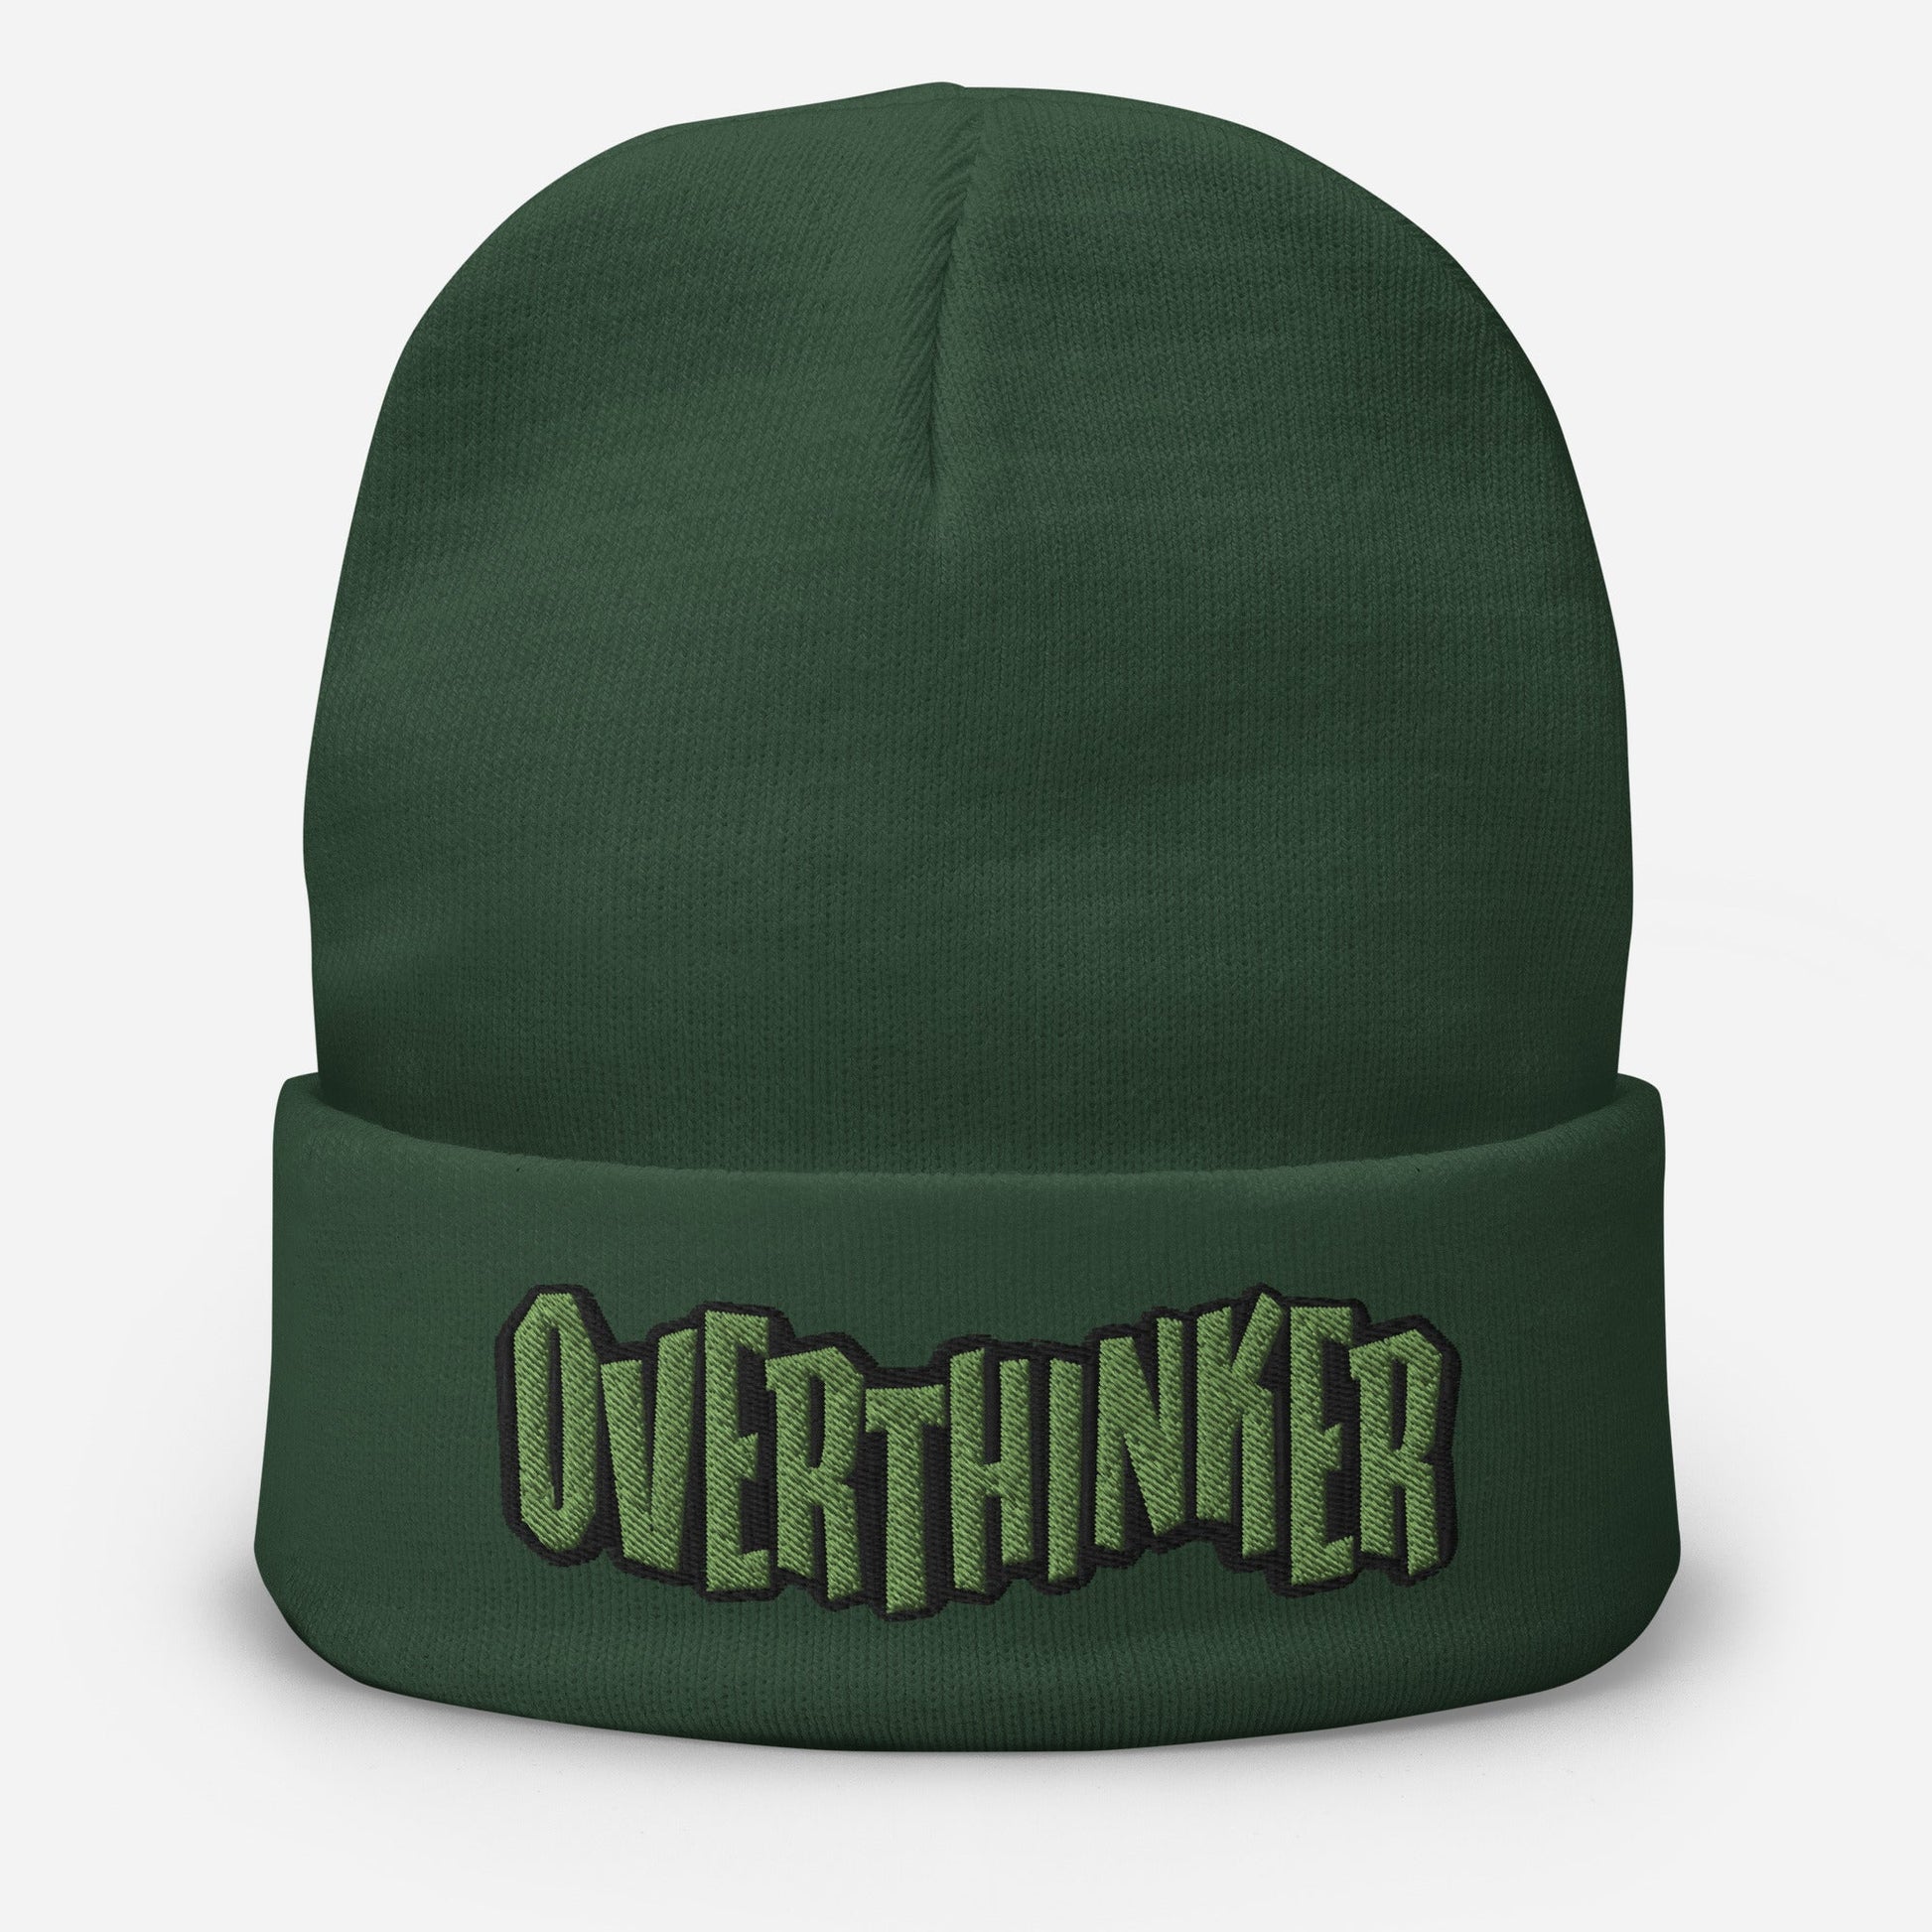  Overthinker Embroidered Beanie Winter Hat ArcZeal Designs